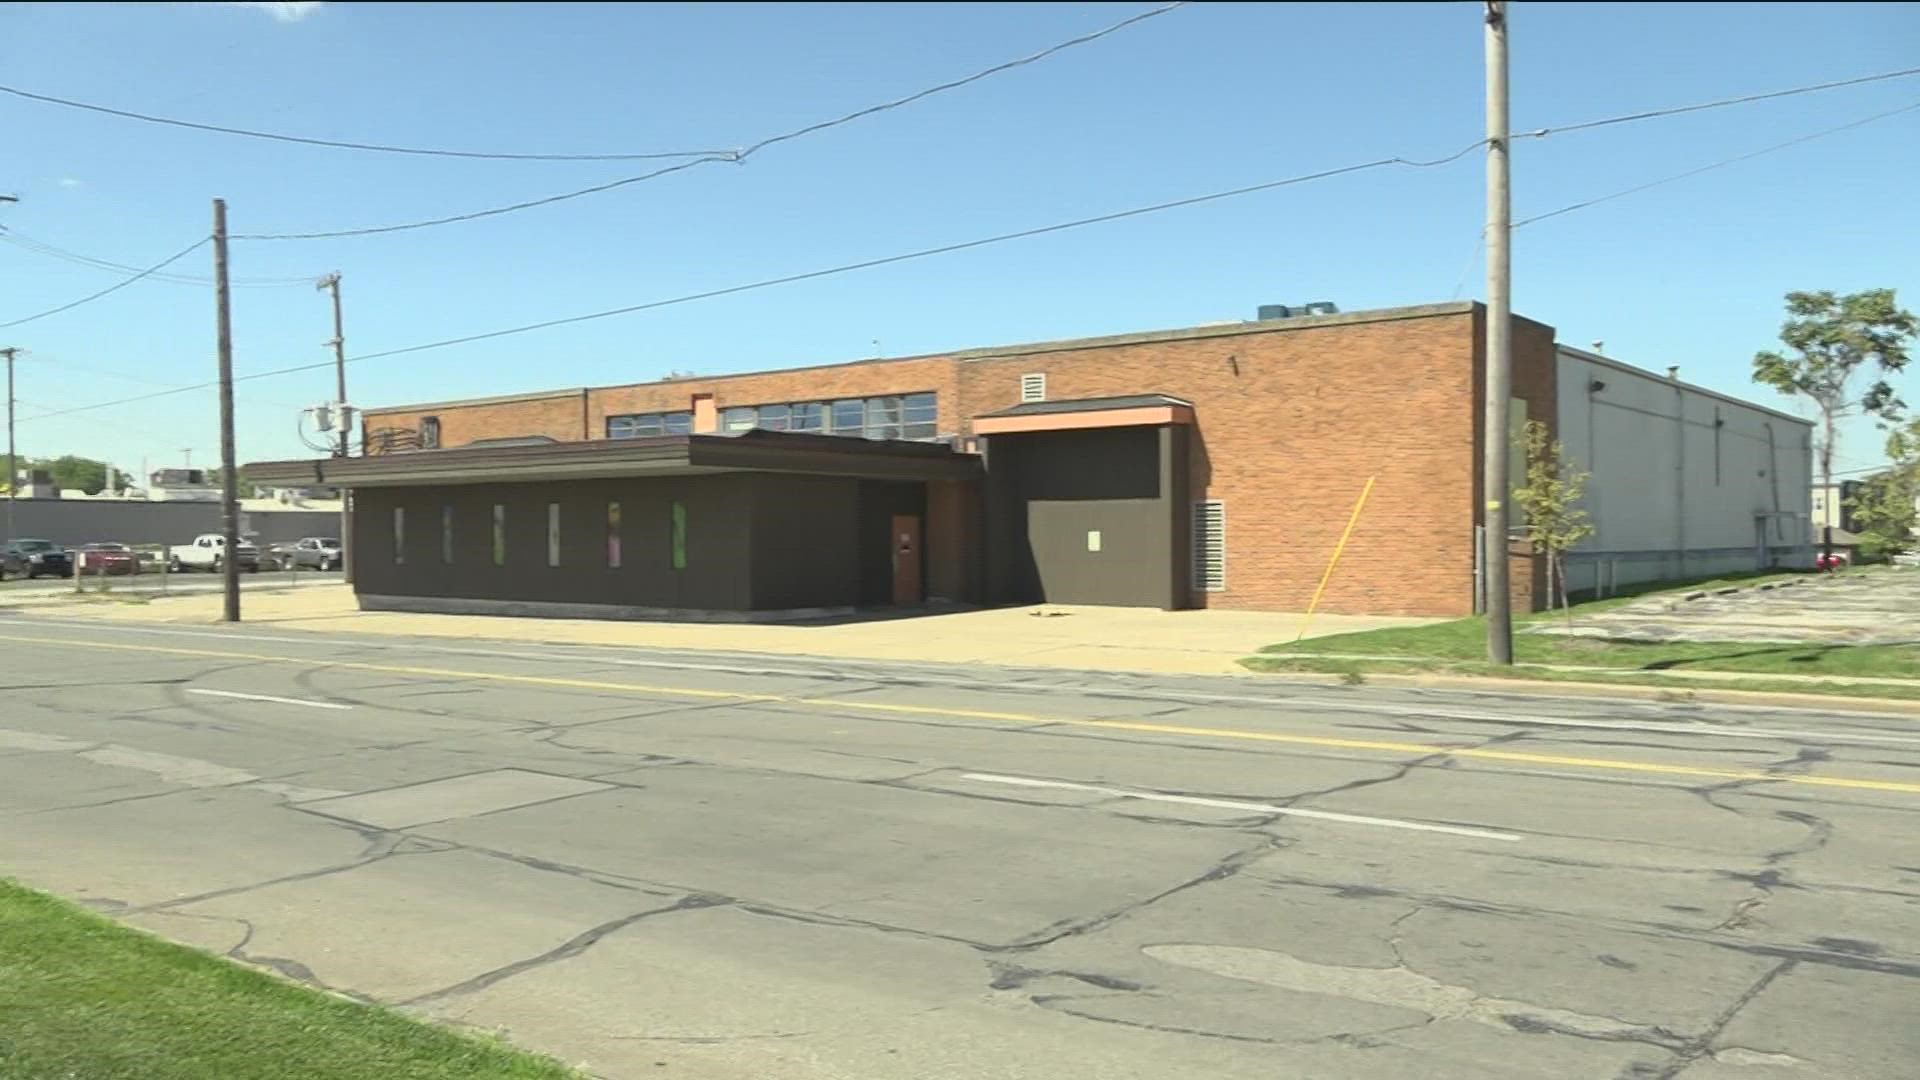 The property now owned by Metroparks Toledo is set to be renovated into a community center along Front Street near the Glass City Metropark.